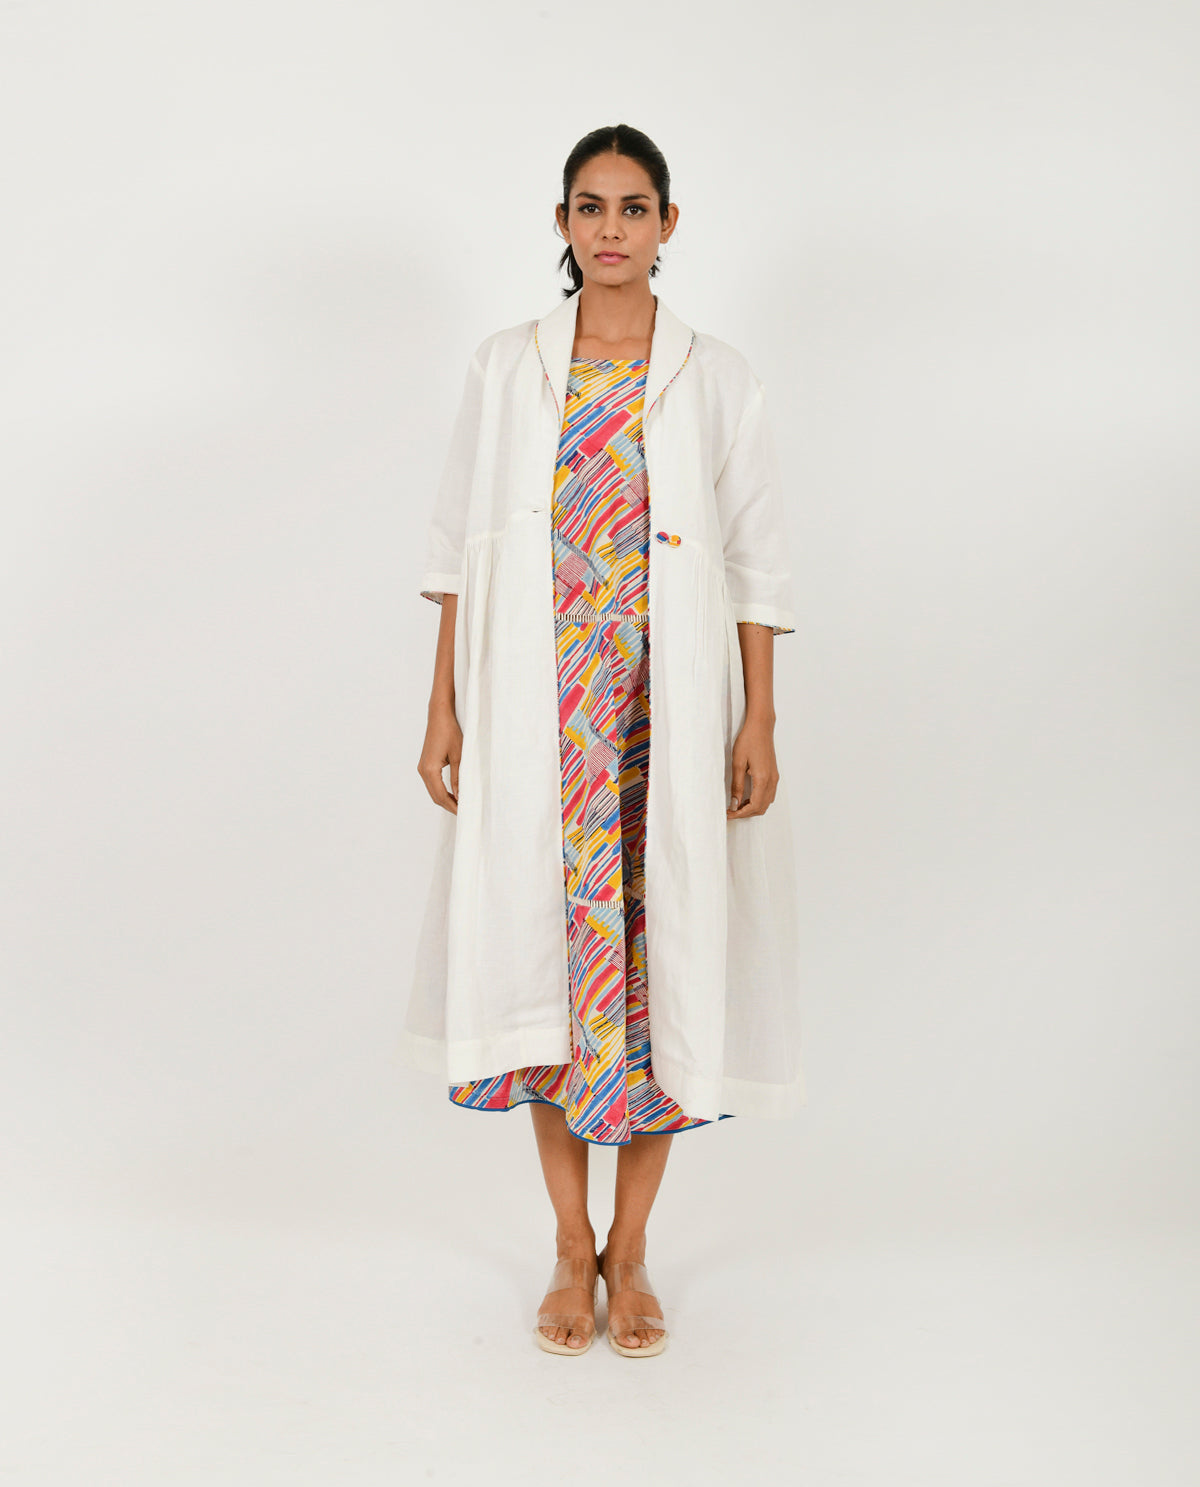 Multicolor Slip/Jacket Set at Kamakhyaa by Rias Jaipur. This item is Block Prints, Casual Wear, Dress Sets, Linen Blend, Multicolor, Natural, Relaxed Fit, Scribble Prints, Womenswear, Yaadein